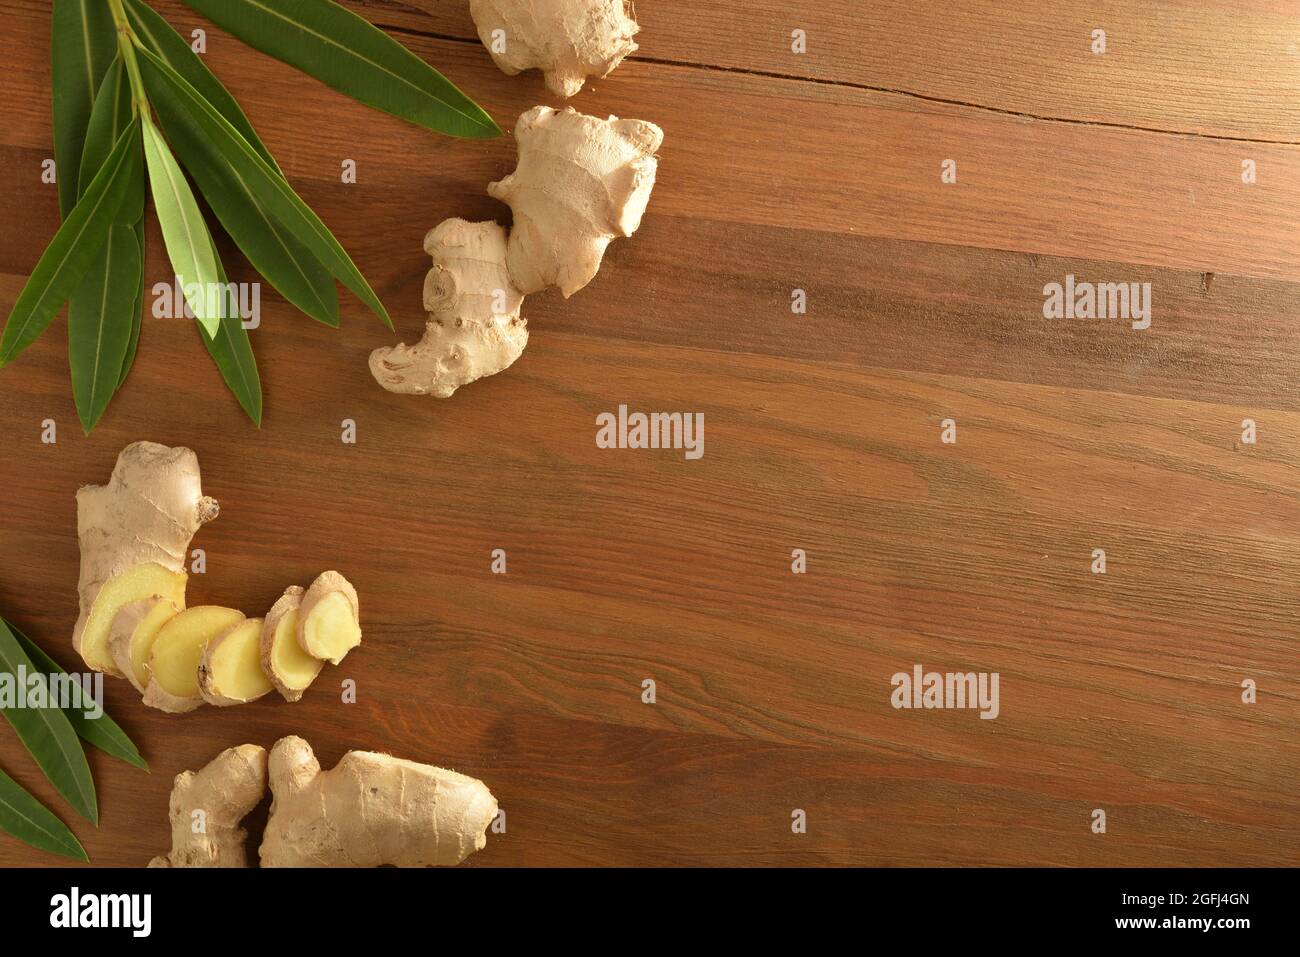 Ginger root as a product for healing purposes with sliced portions and leaves on wooden table. Top view. Stock Photo